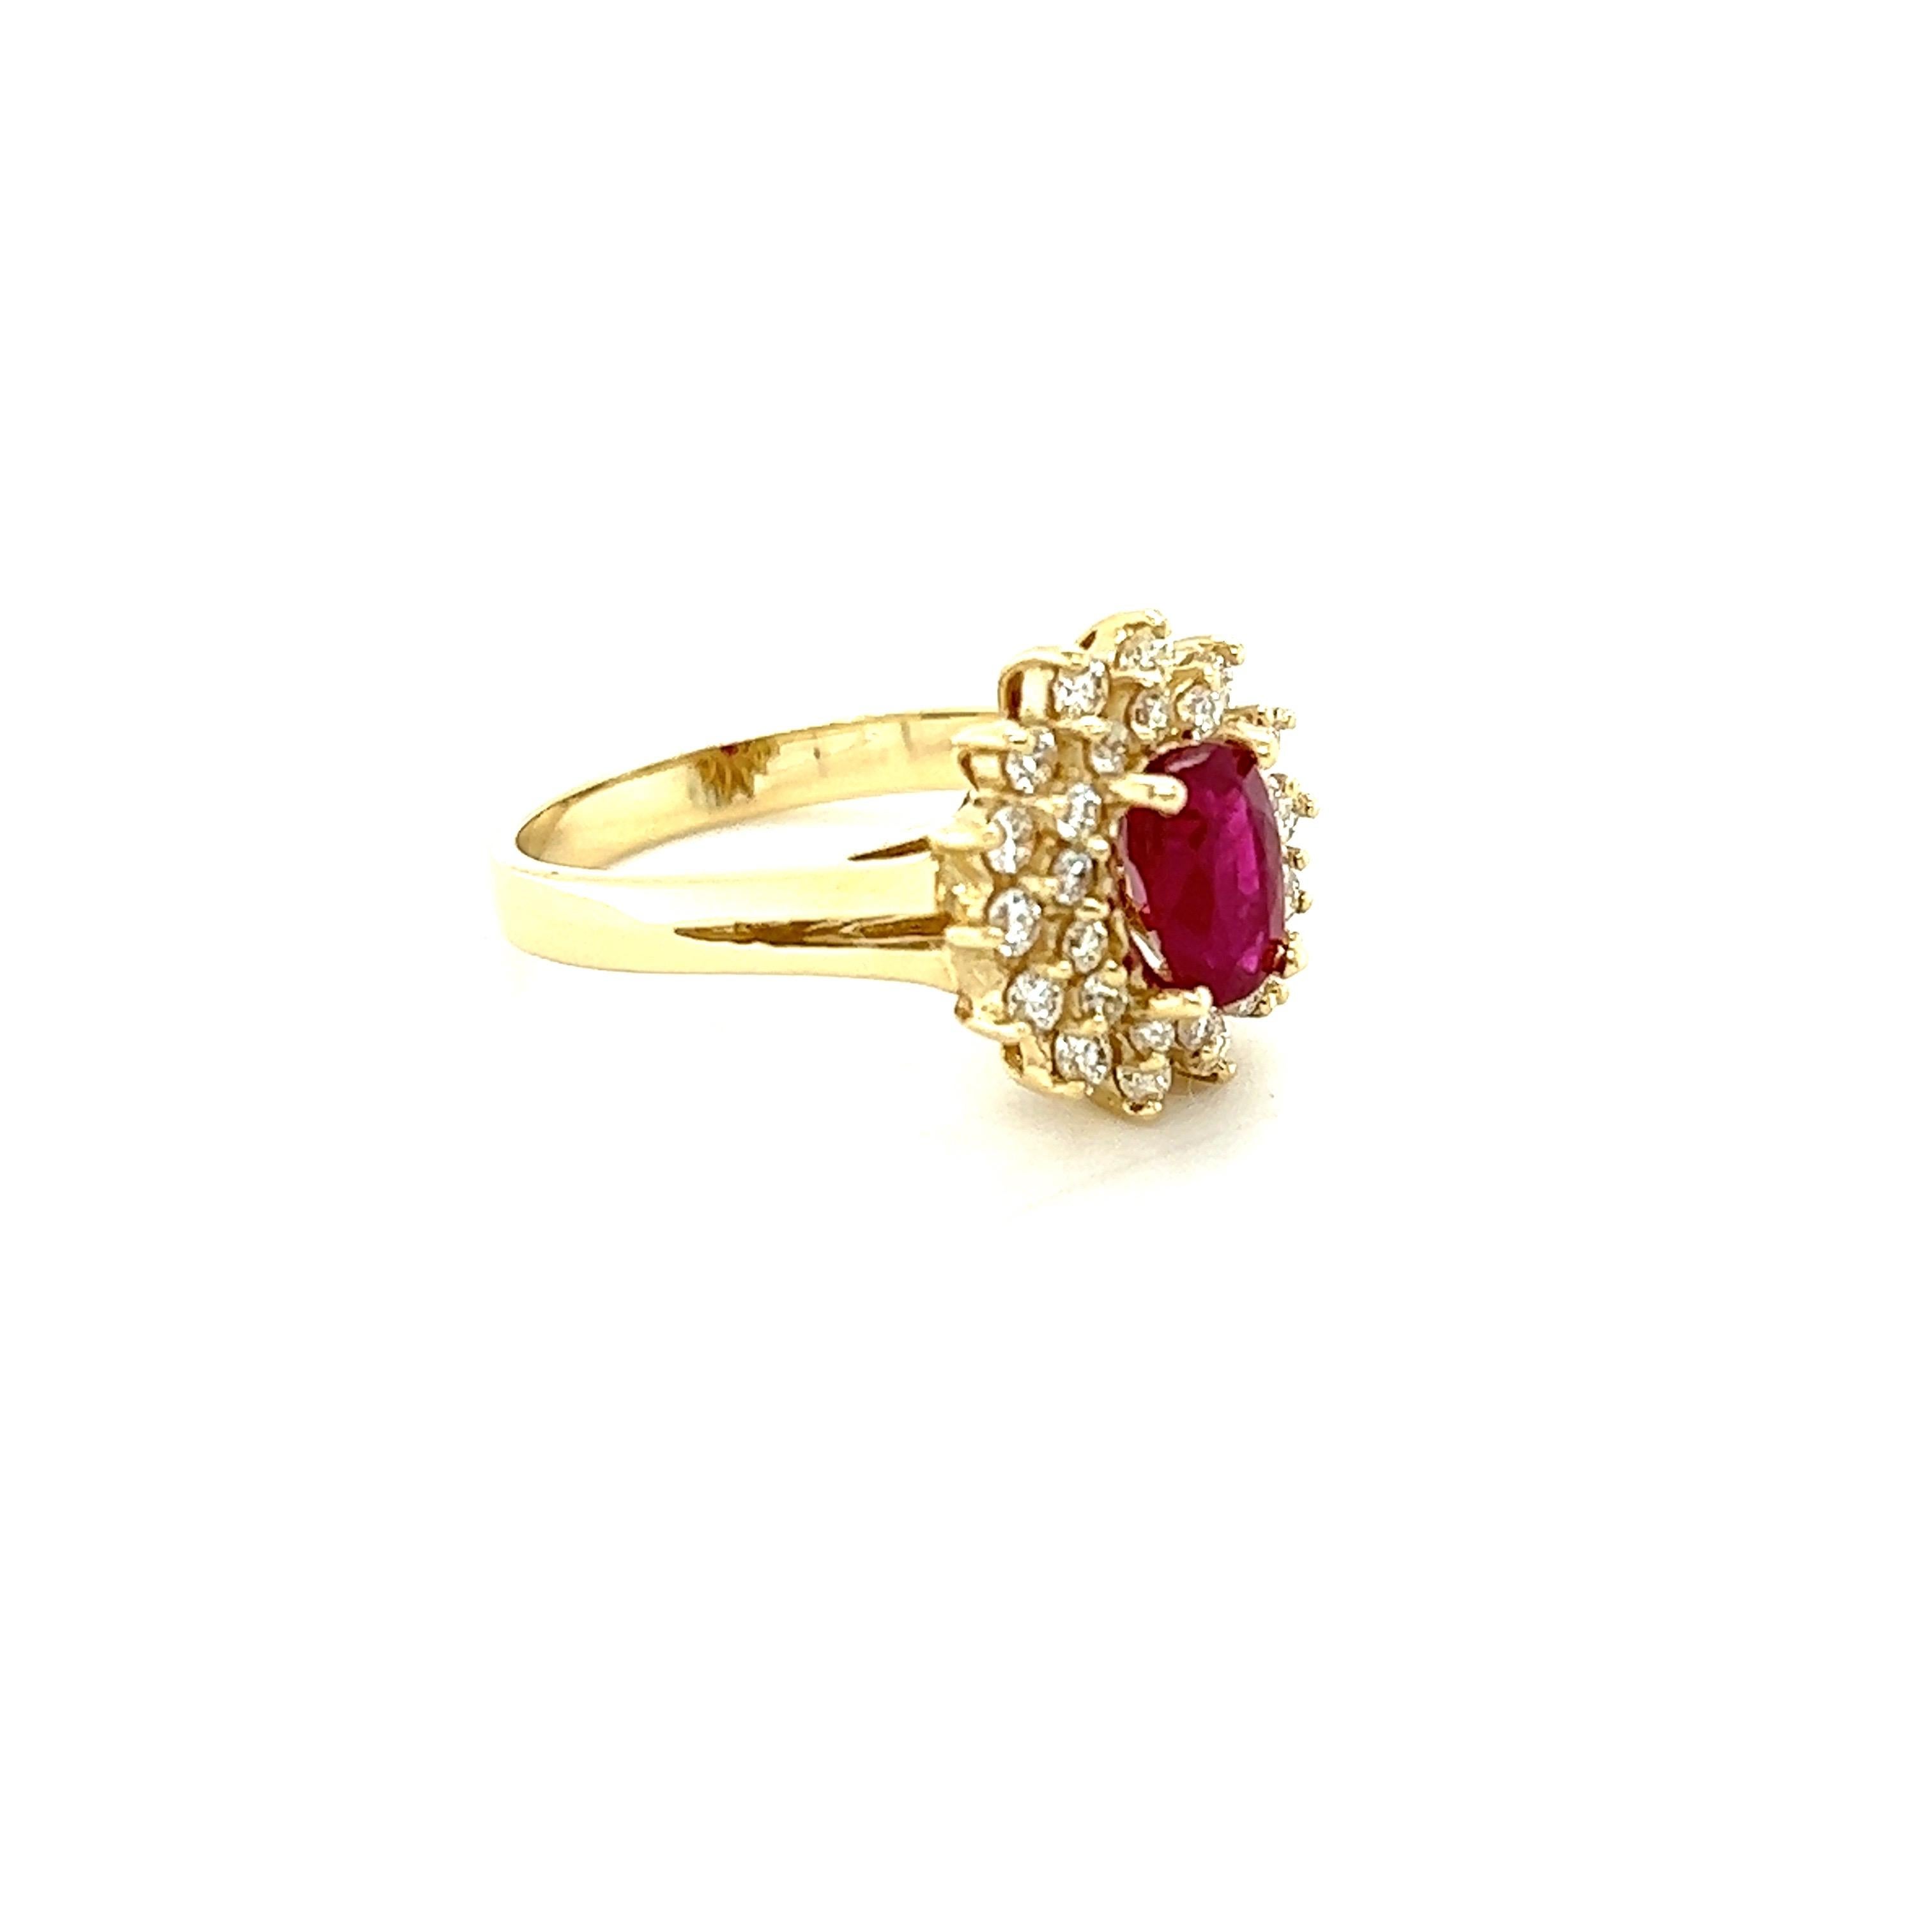 This Ring has a Oval Cut Natural Ruby that measures at approximately 7 mm x 4.5 mm and weighs at 1.14 carats. It also has 28 Round Cut Diamonds that weigh 0.49 carats. The total carat weight of the ring is 1.63 carats. 

The clarity and color of the